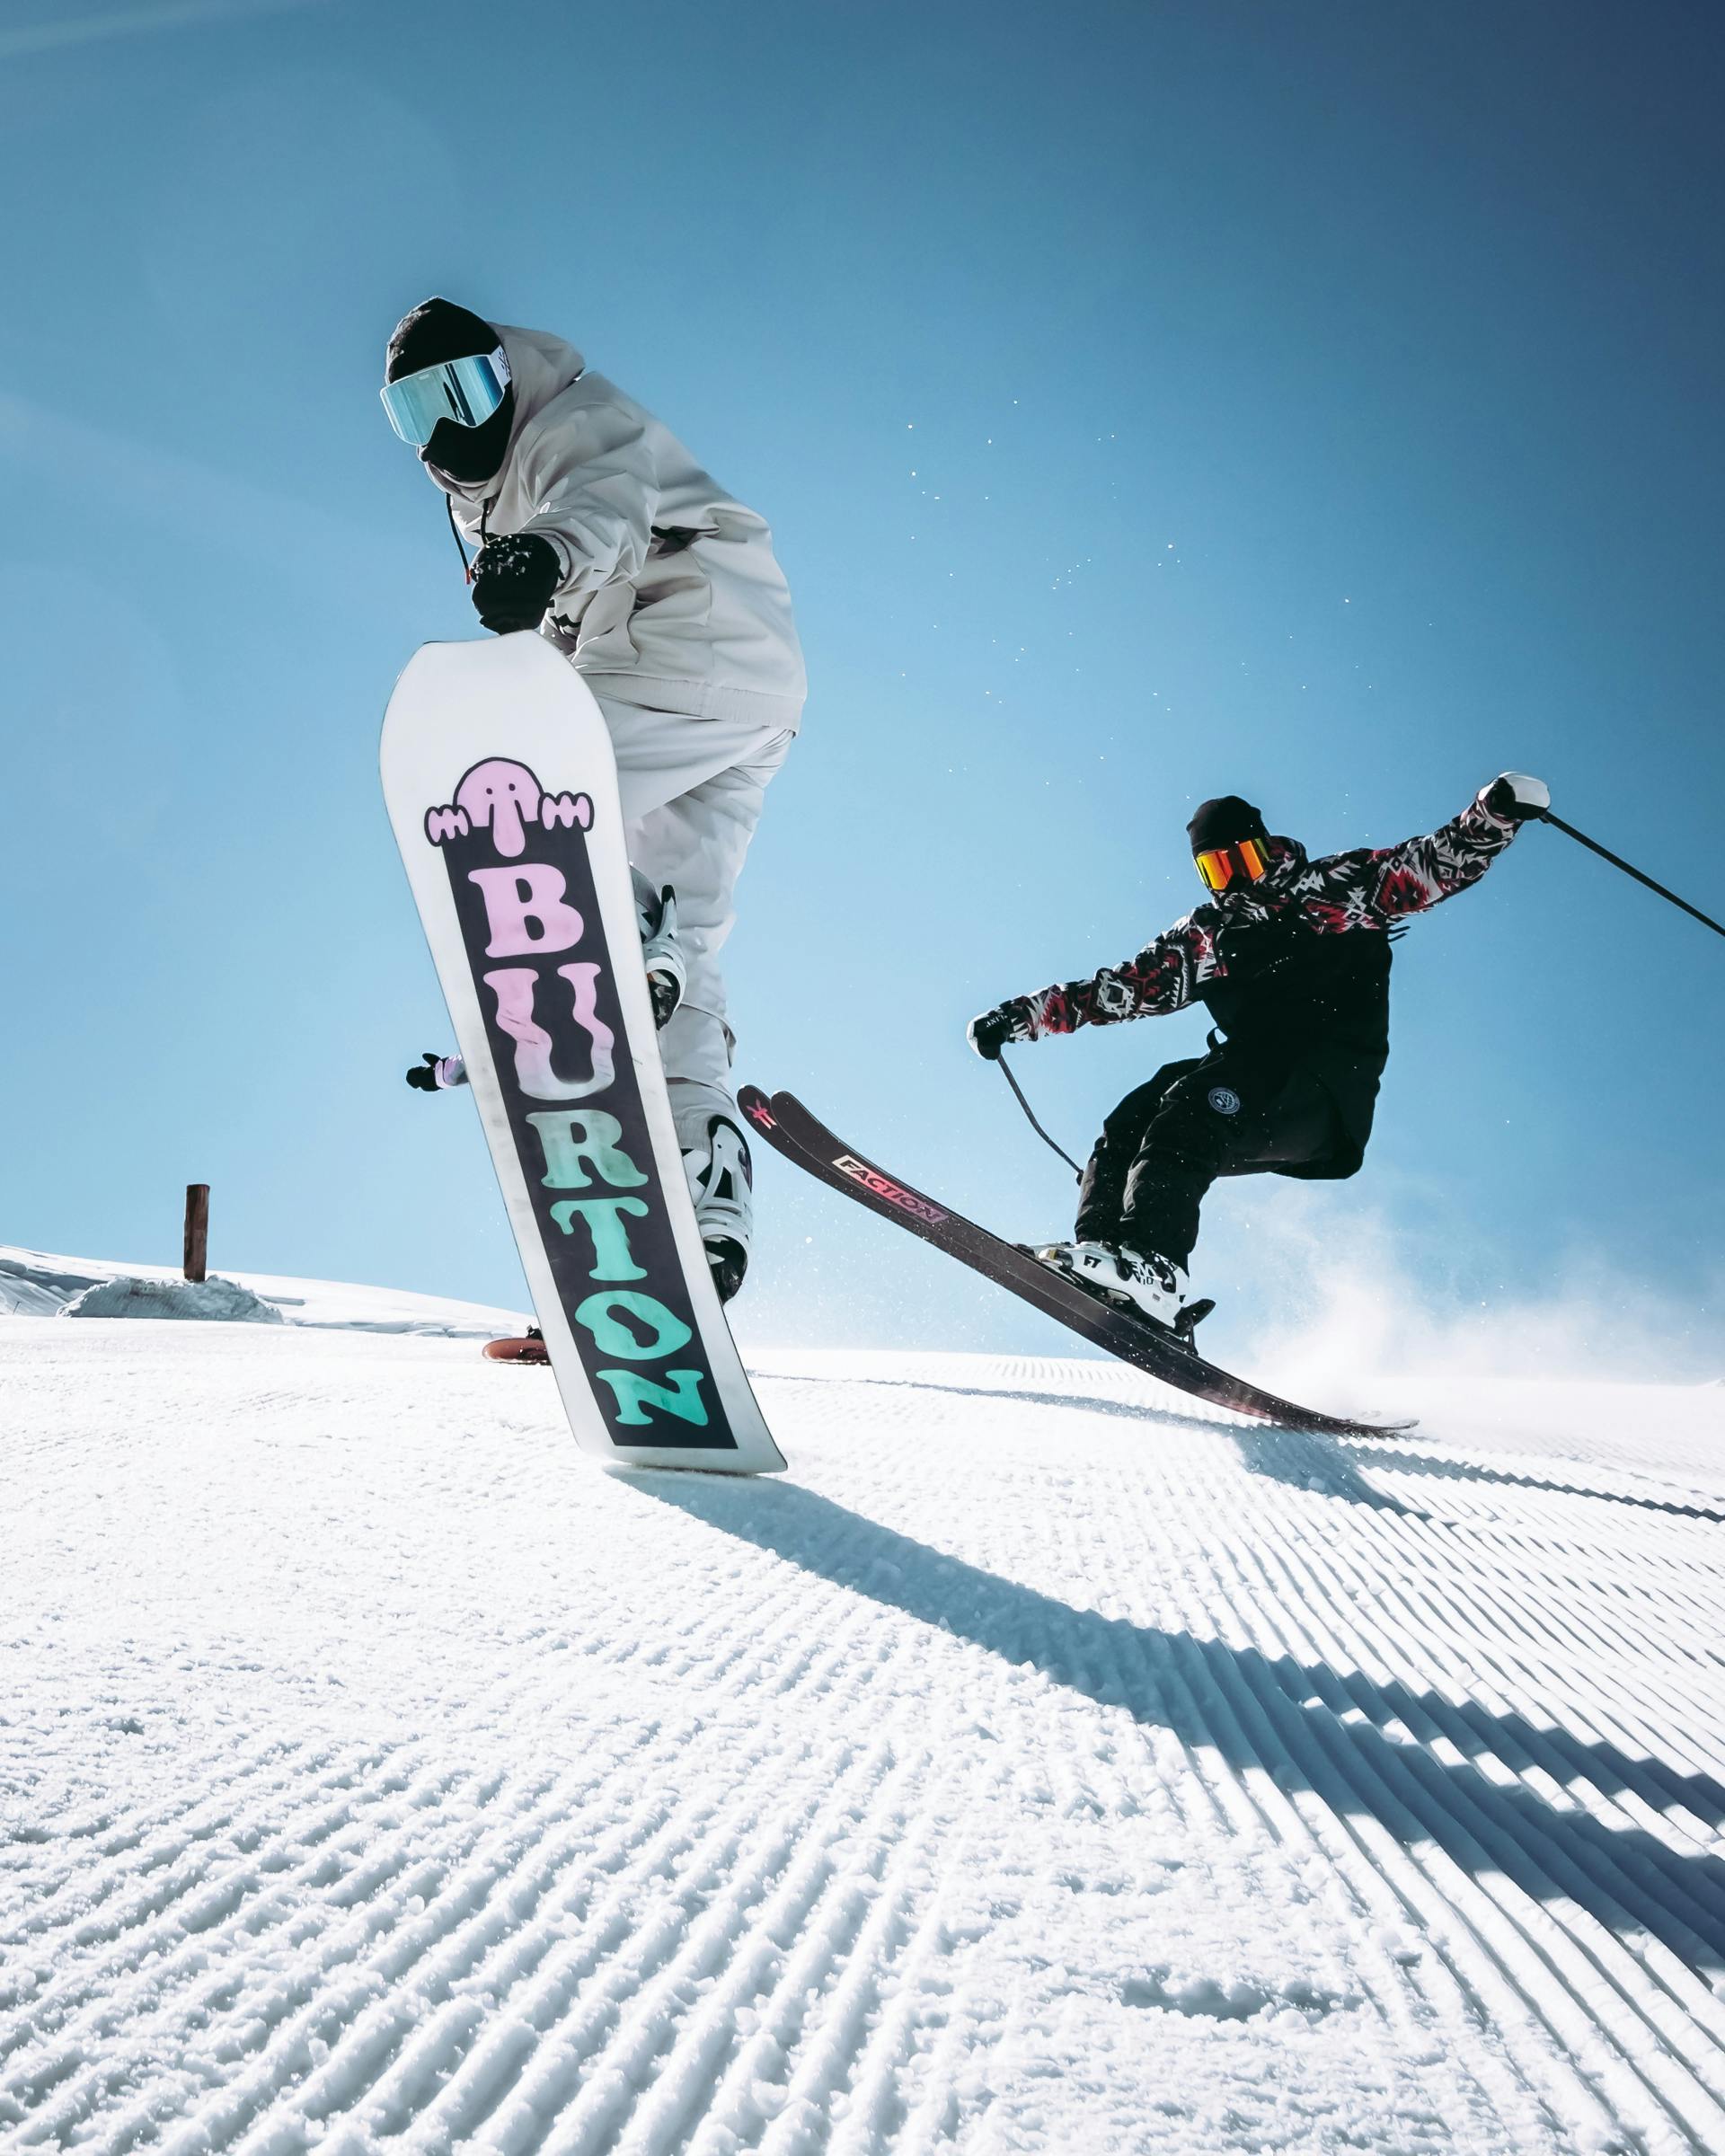 The commercialisation of snowboarding